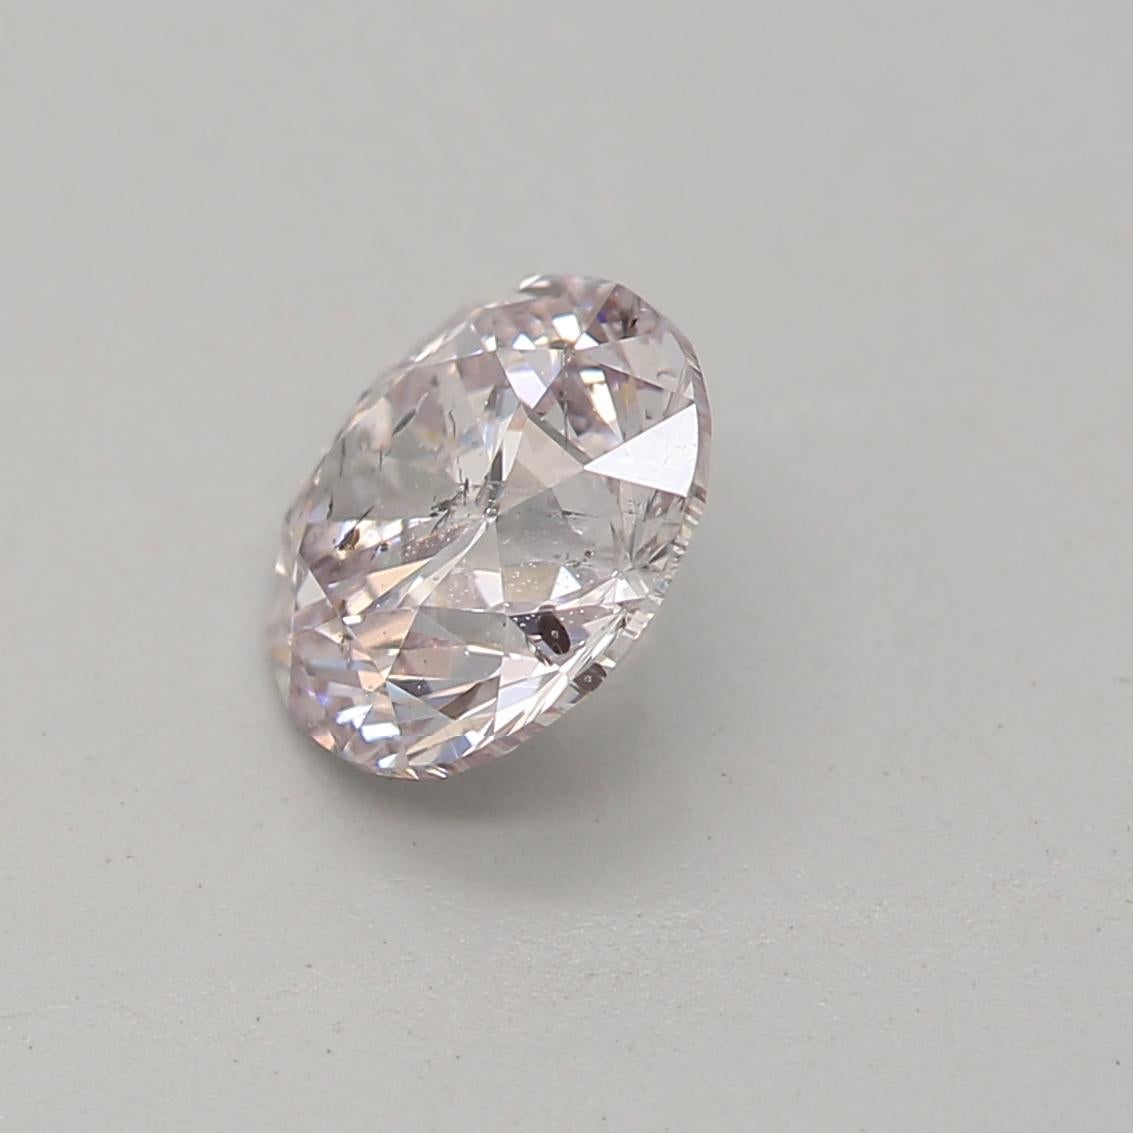 Round Cut 0.70 Carat Very Light Pink Round cut diamond I1 Clarity GIA Certified For Sale